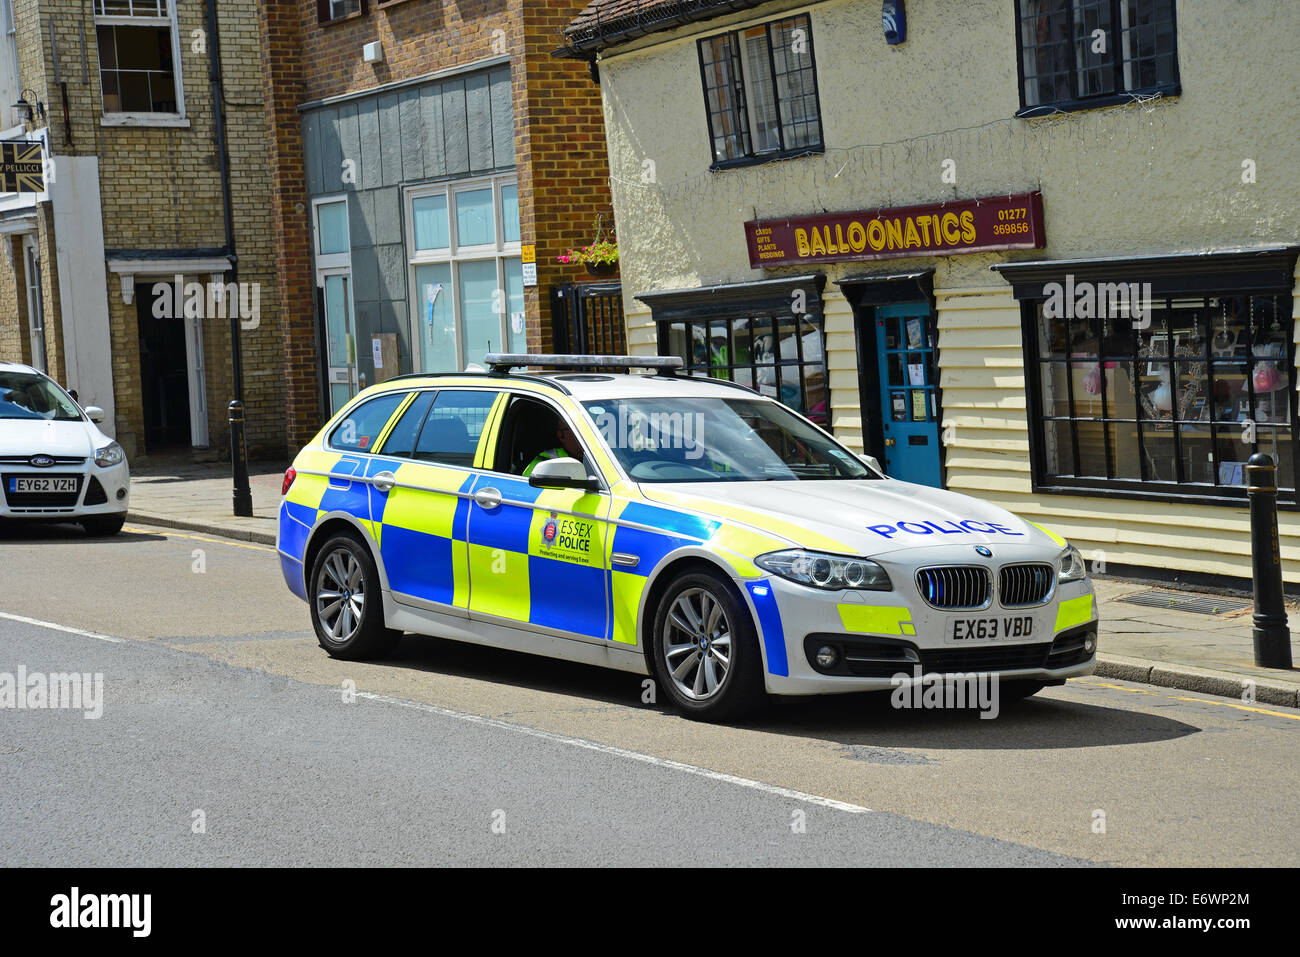 Voiture de police à l'appel, High Street, Chipping Ongar, Essex, Angleterre, Royaume-Uni Banque D'Images